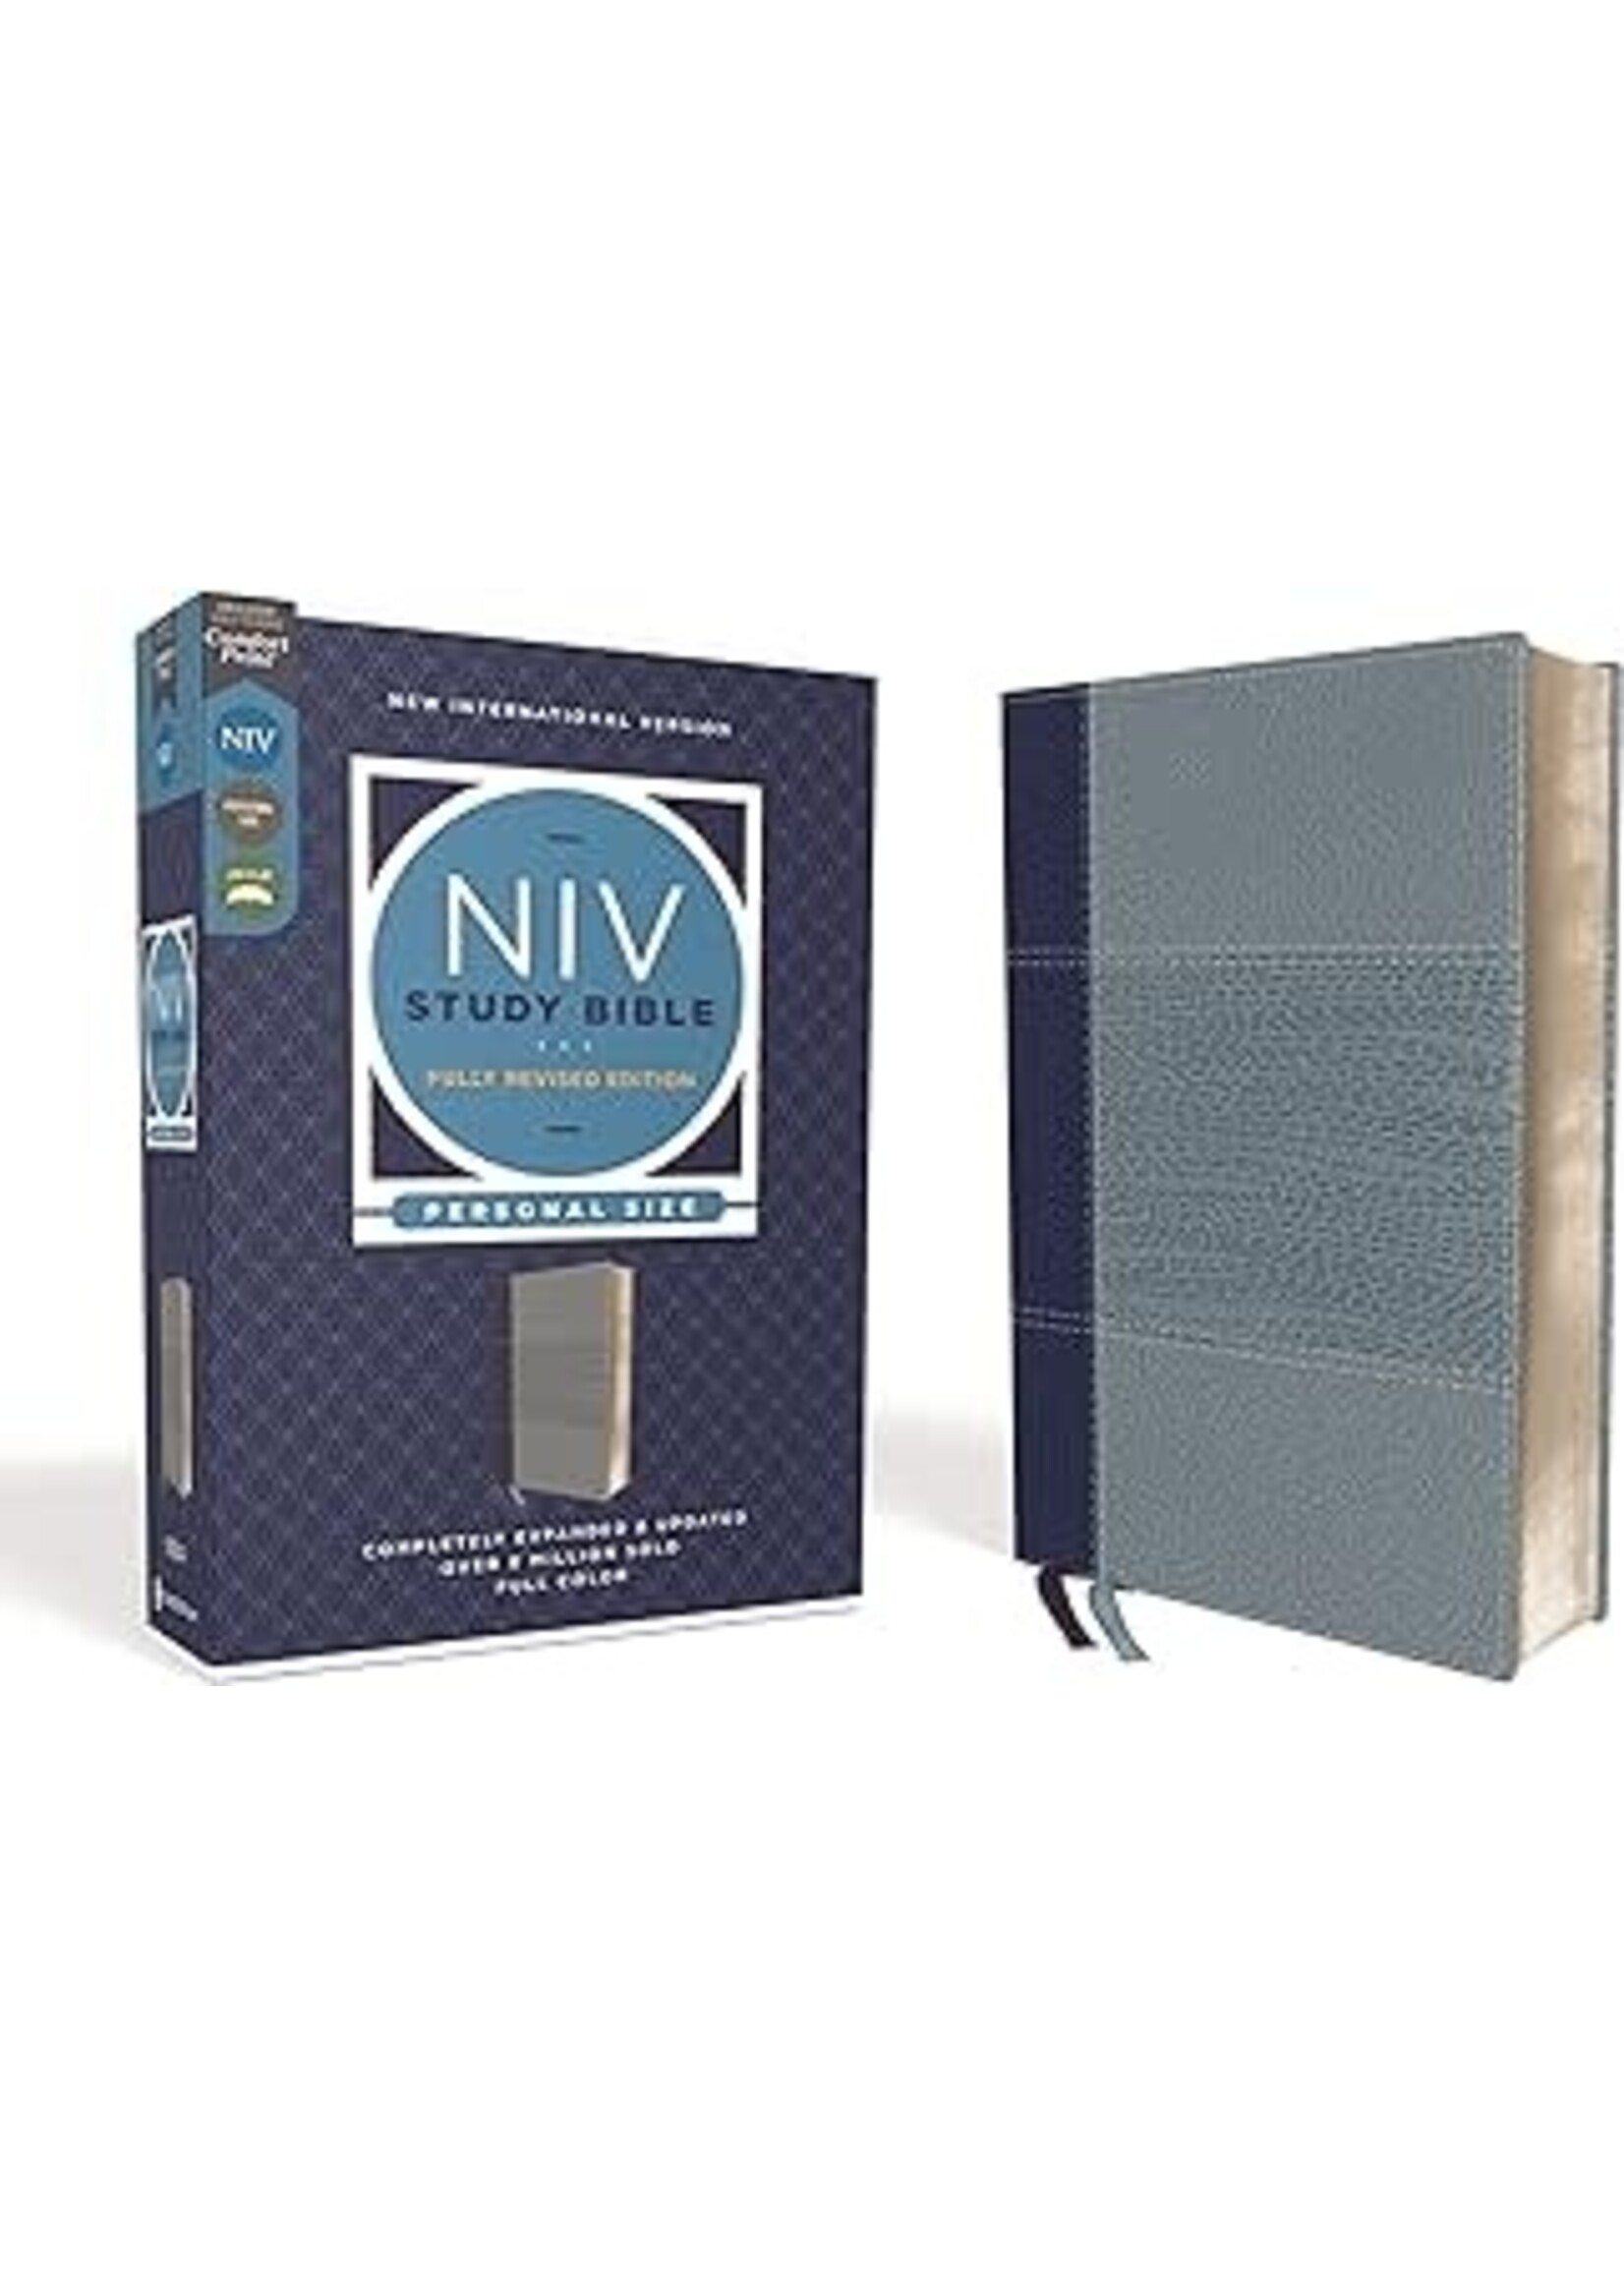 NIV Study Bible/Personal Size (Fully Revised Edition) (Comfort Print)-Navy/Slate Blue Leathersoft